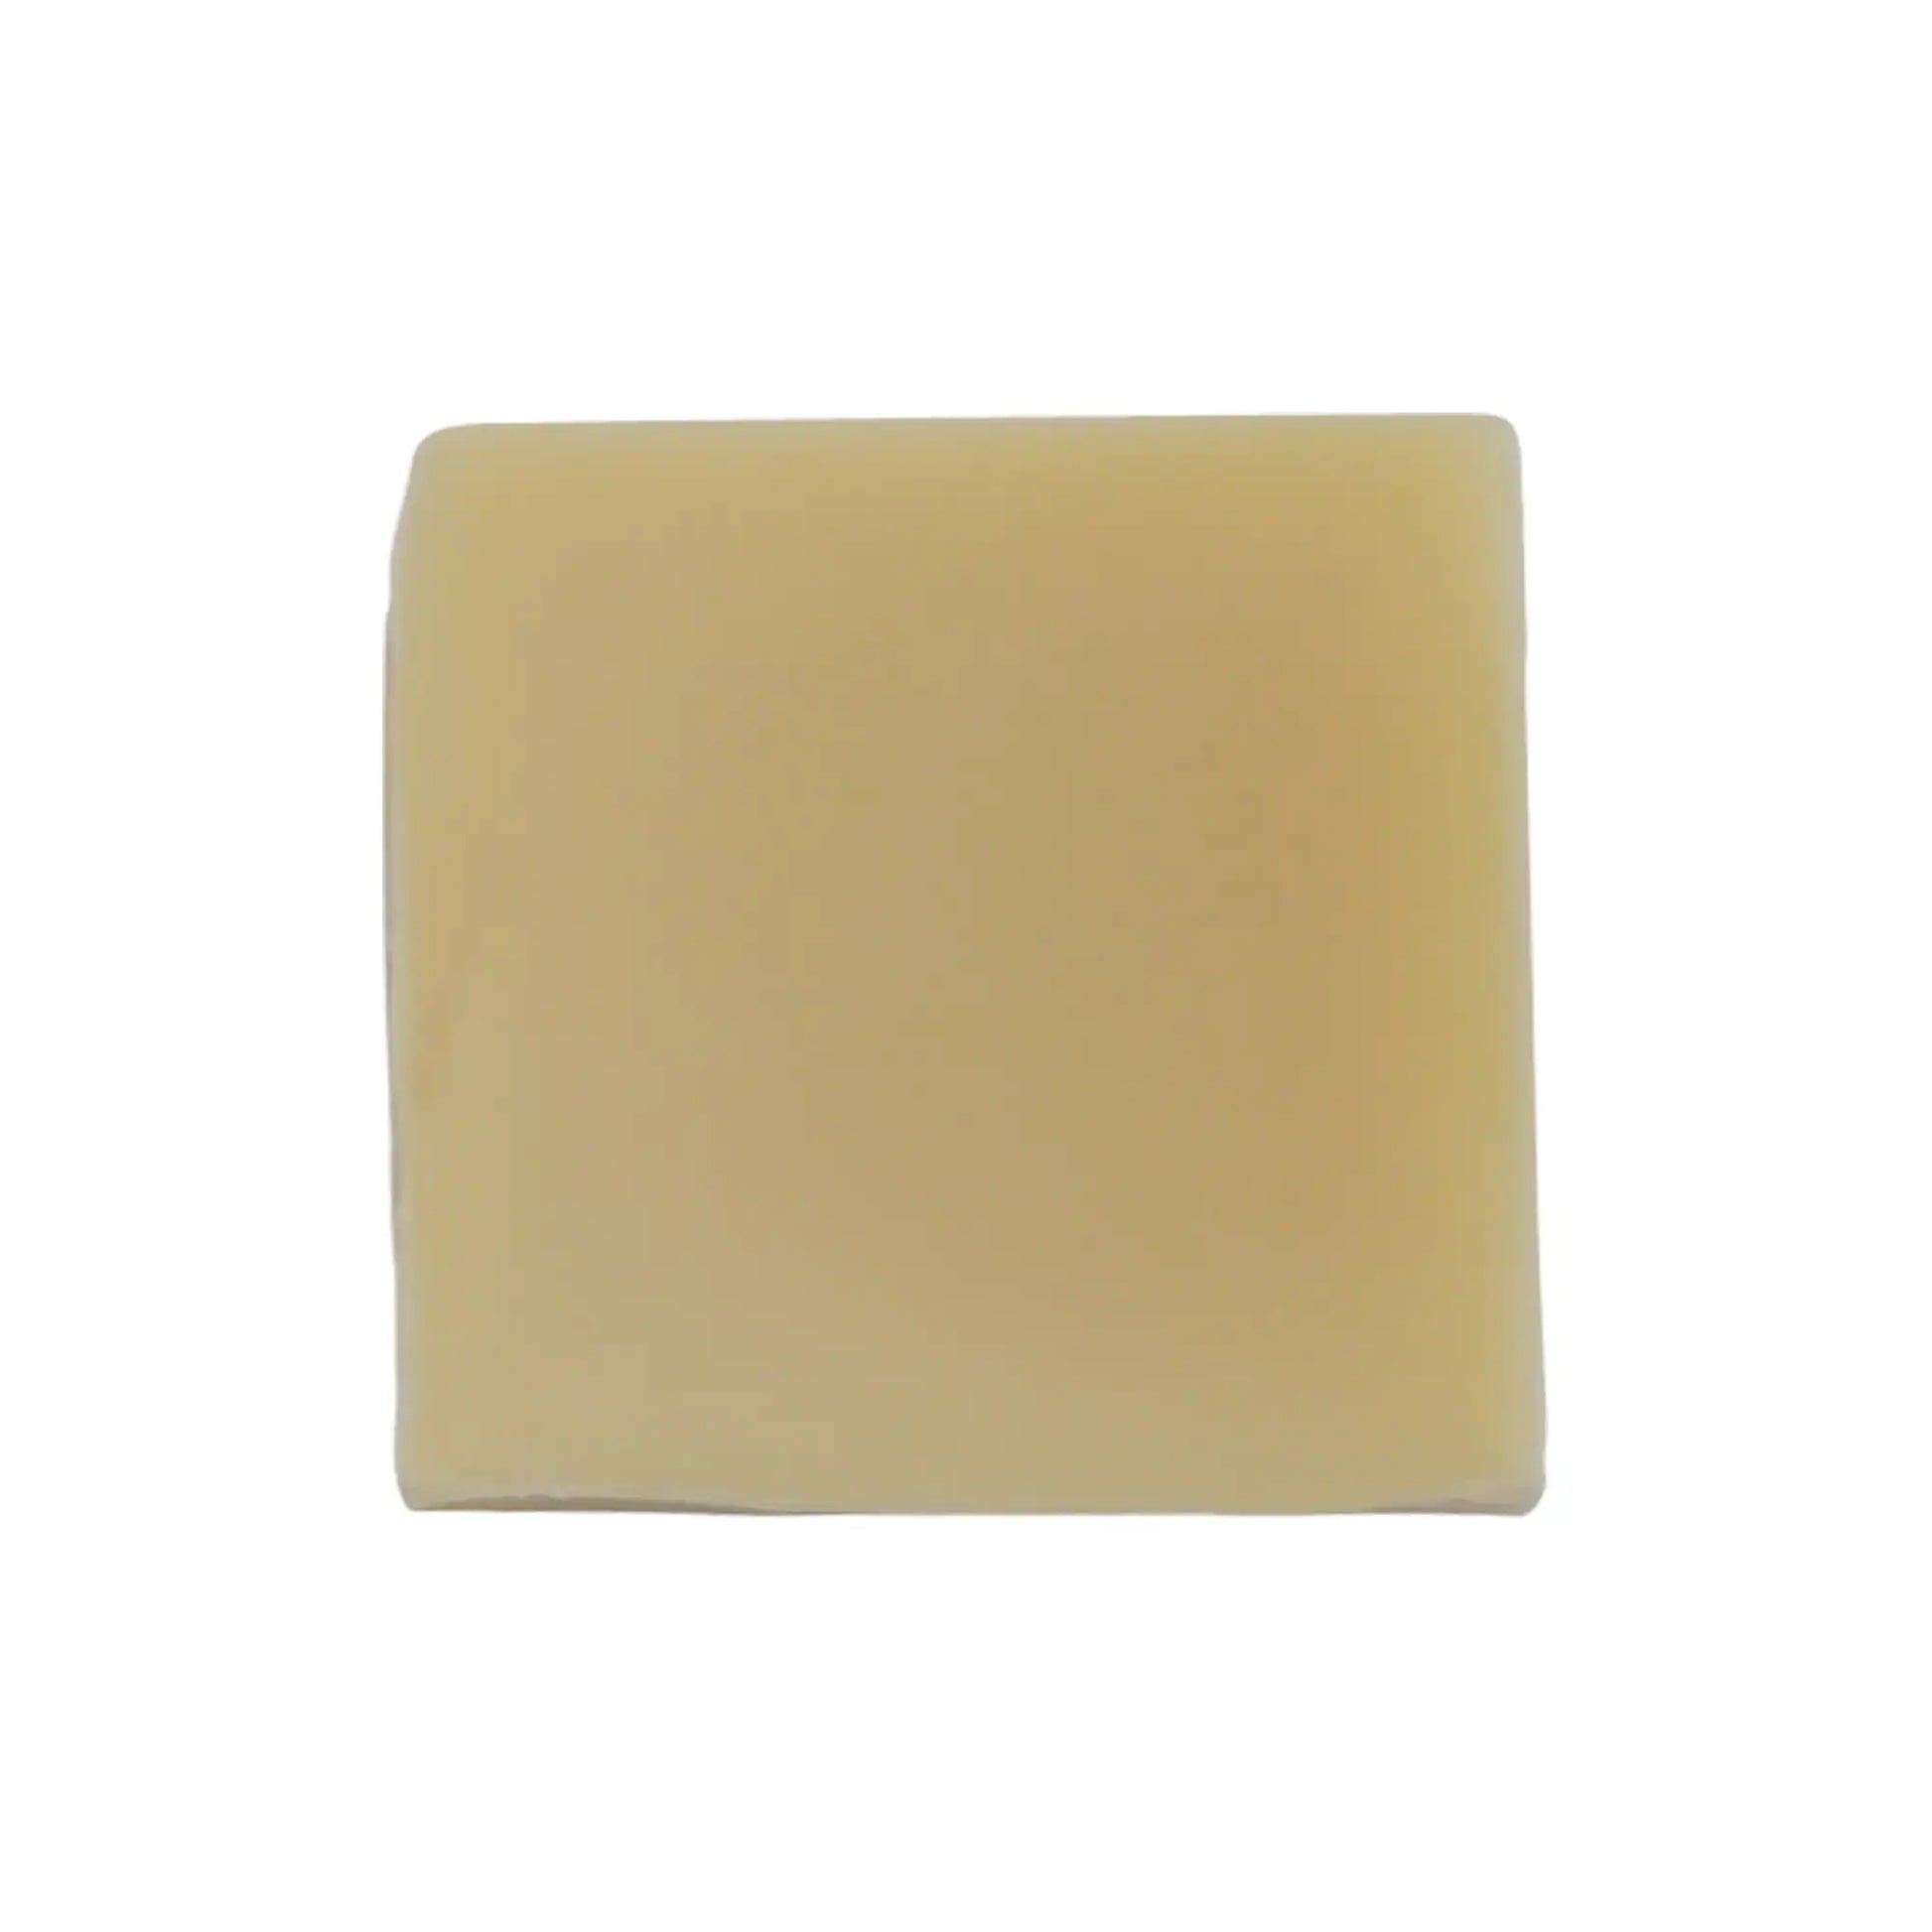 Experience the luxury of Cruisin Organics Natural Organic Coconutty Soap. Made with organic coconut oil, shea butter, and goat milk, this soap bar nourishes and rejuvenates your skin.